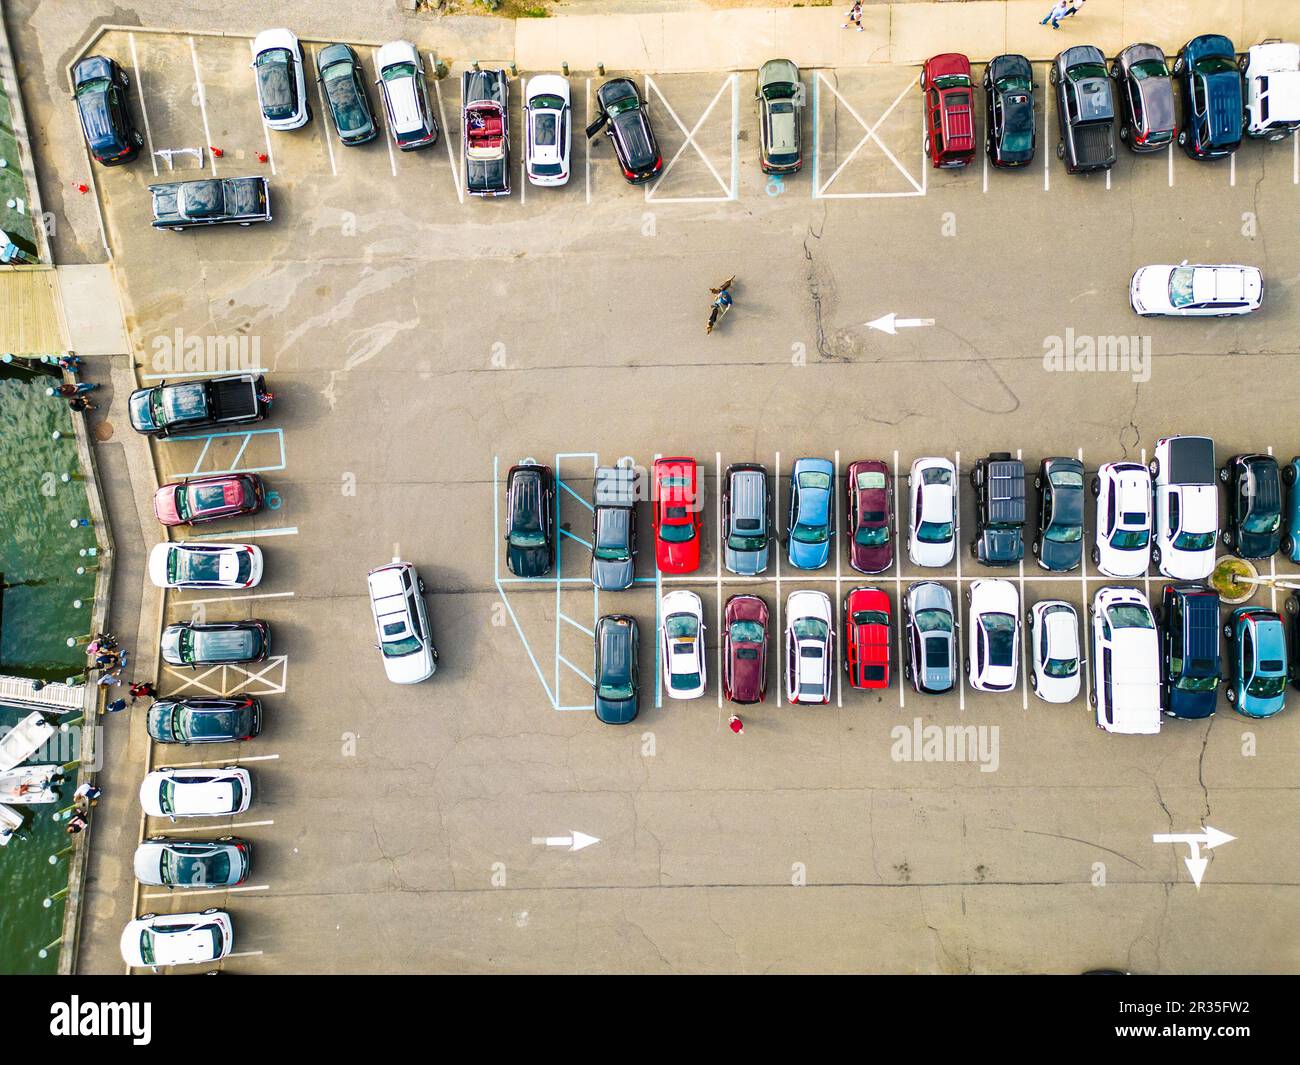 Parking lot with cars as seen from aerial overhead view Stock Photo